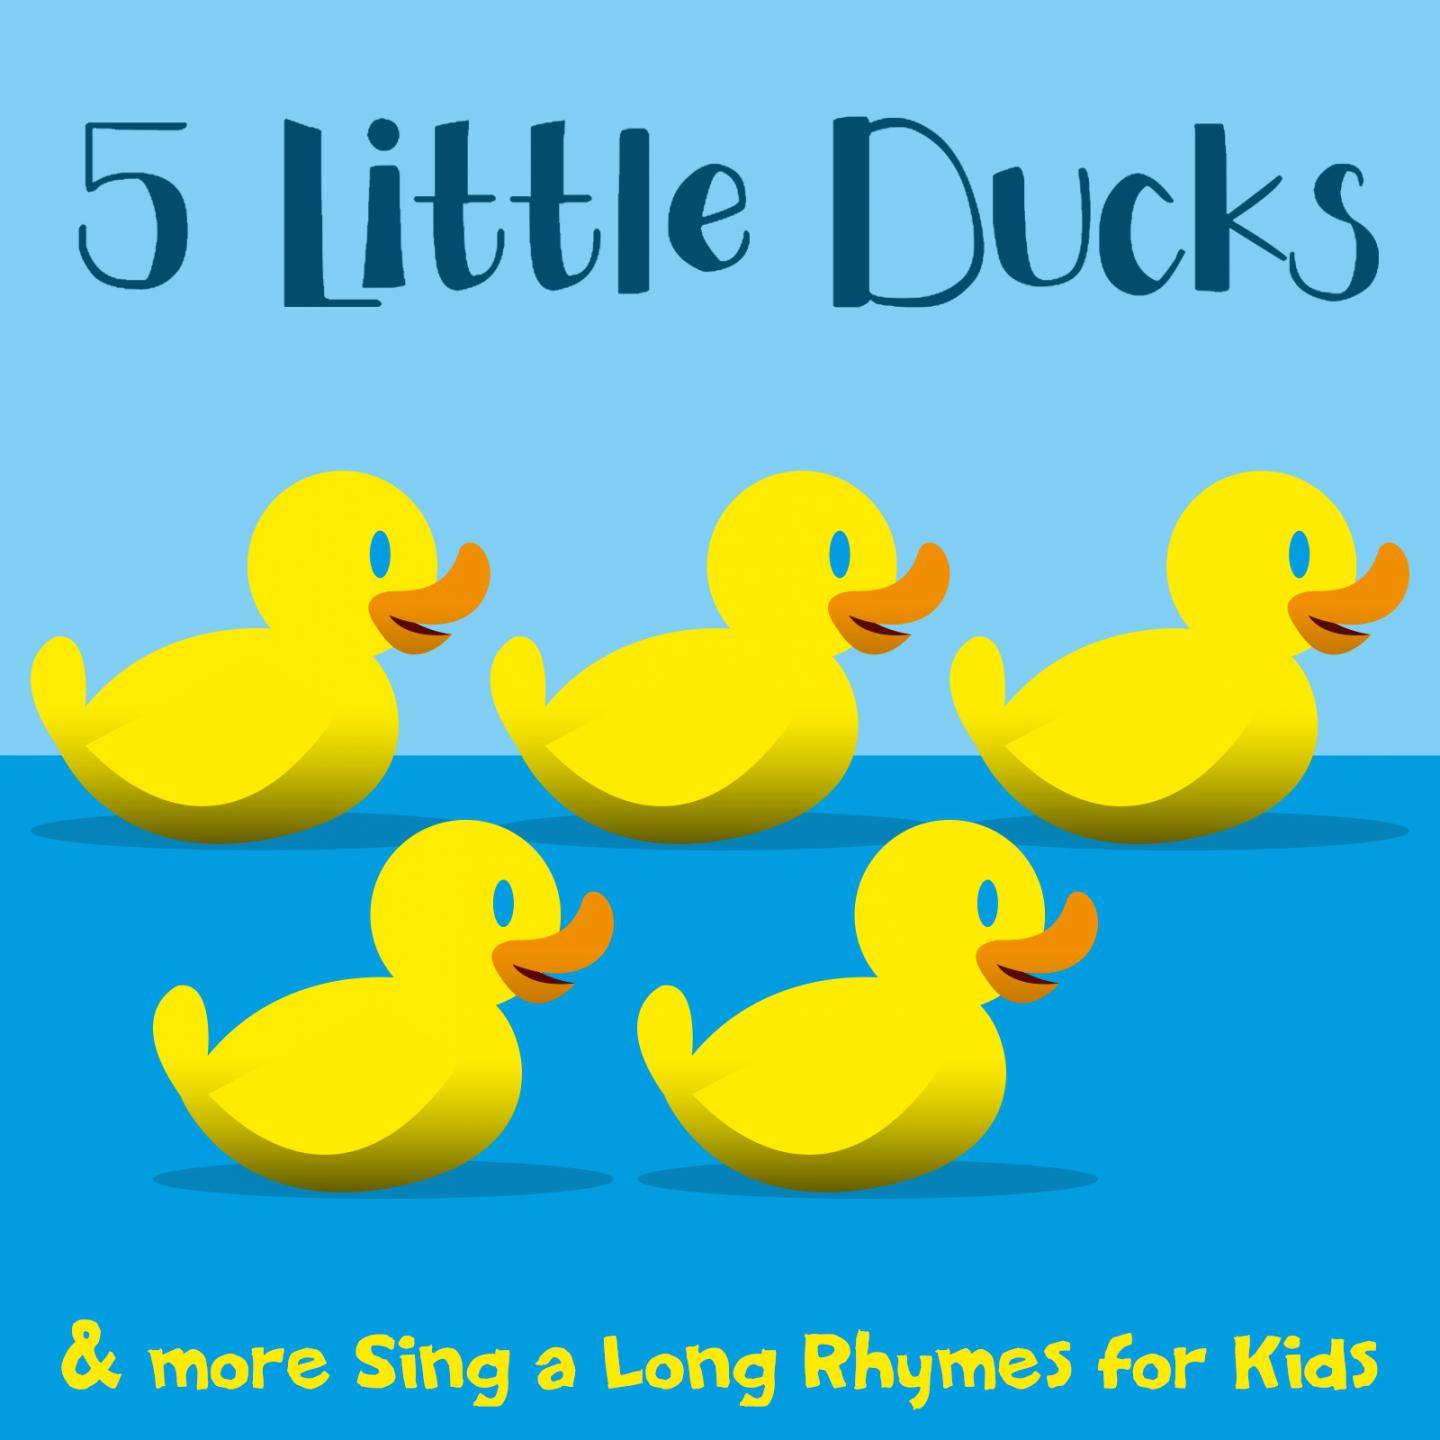 5 Little Ducks & More Sing a Long Rhymes for Kids